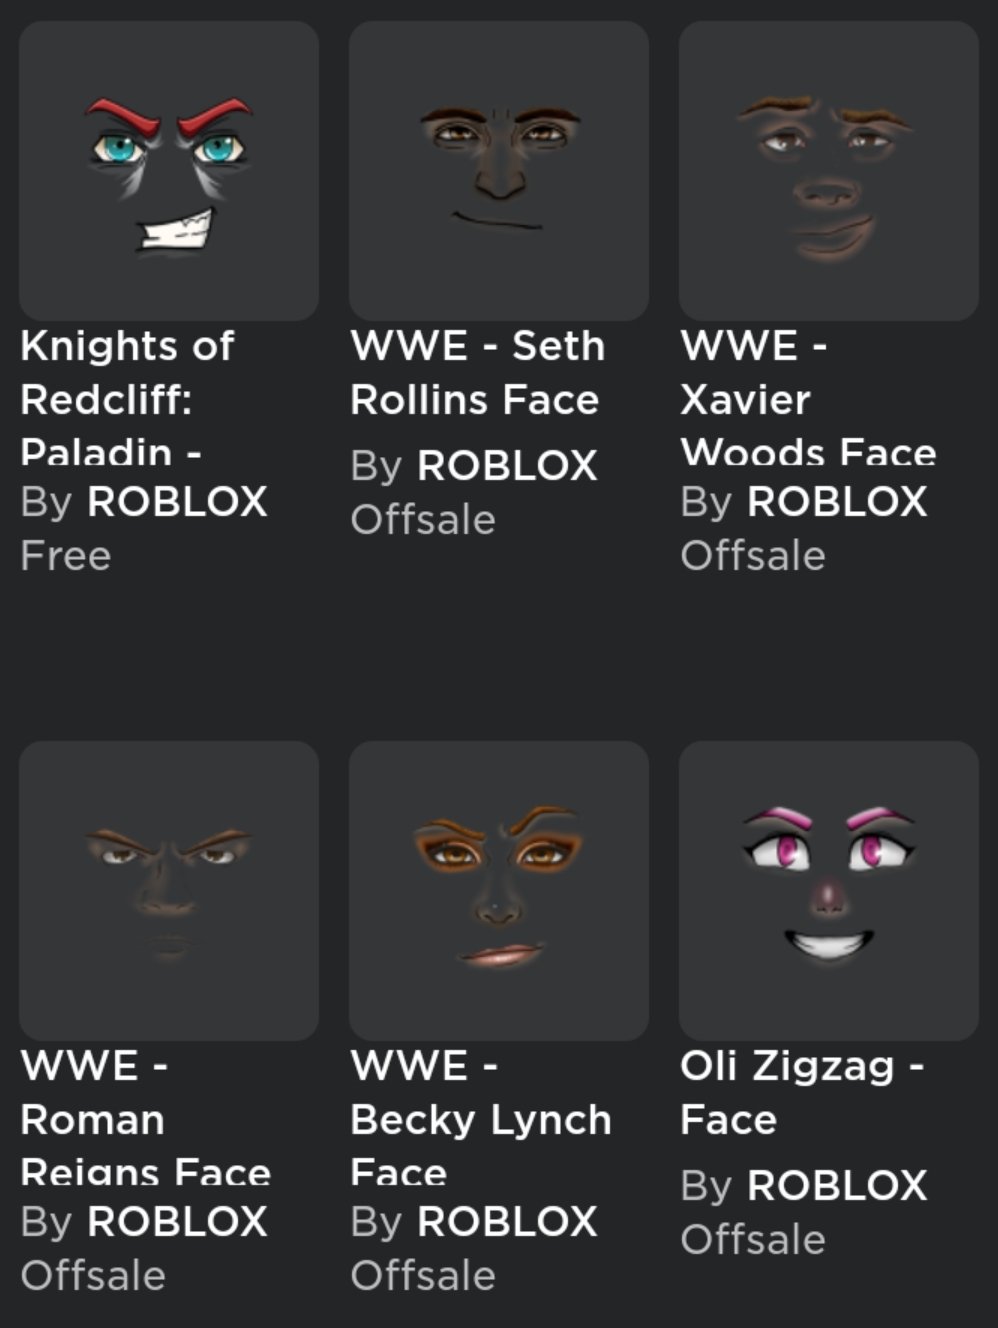 NEW* HOW TO GET FREE FACES ON ROBLOX 2021! GET ANY FACE ON ROBLOX FOR FREE  (WORKING) 